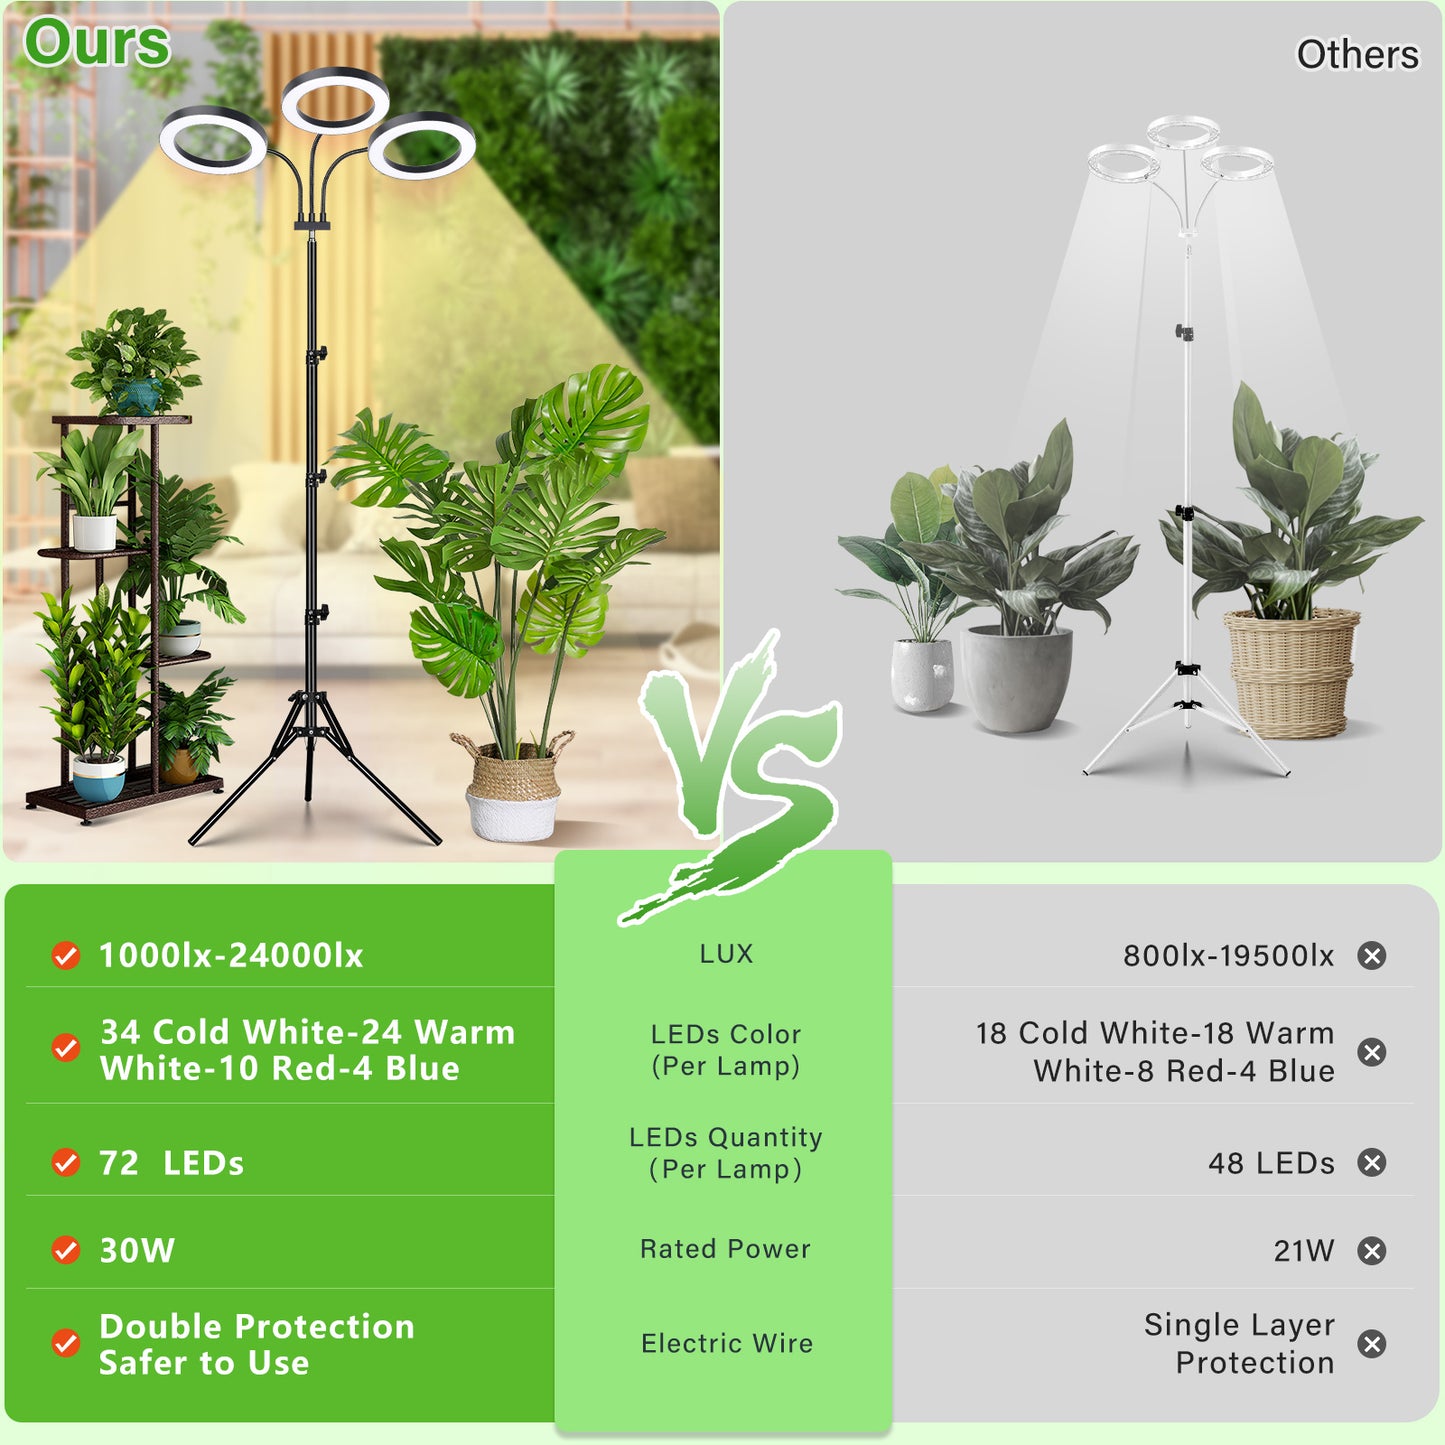 FOXGARDEN 6.3'' Diameter Halo Plant Light with Stand Tri-head